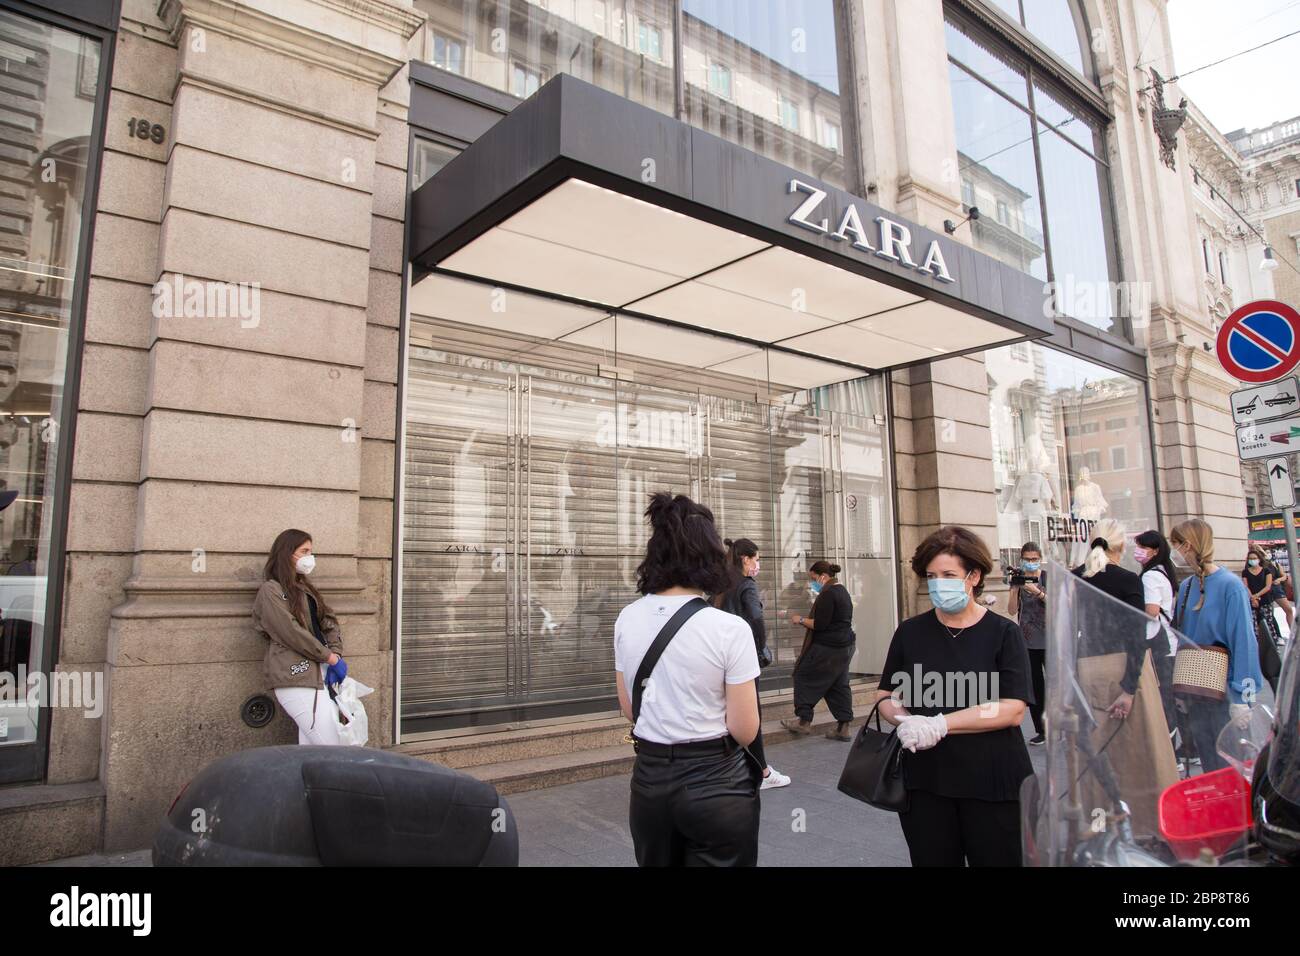 Roma, Italy. 18th May, 2020. People lined up in front of Zara store in Via  del